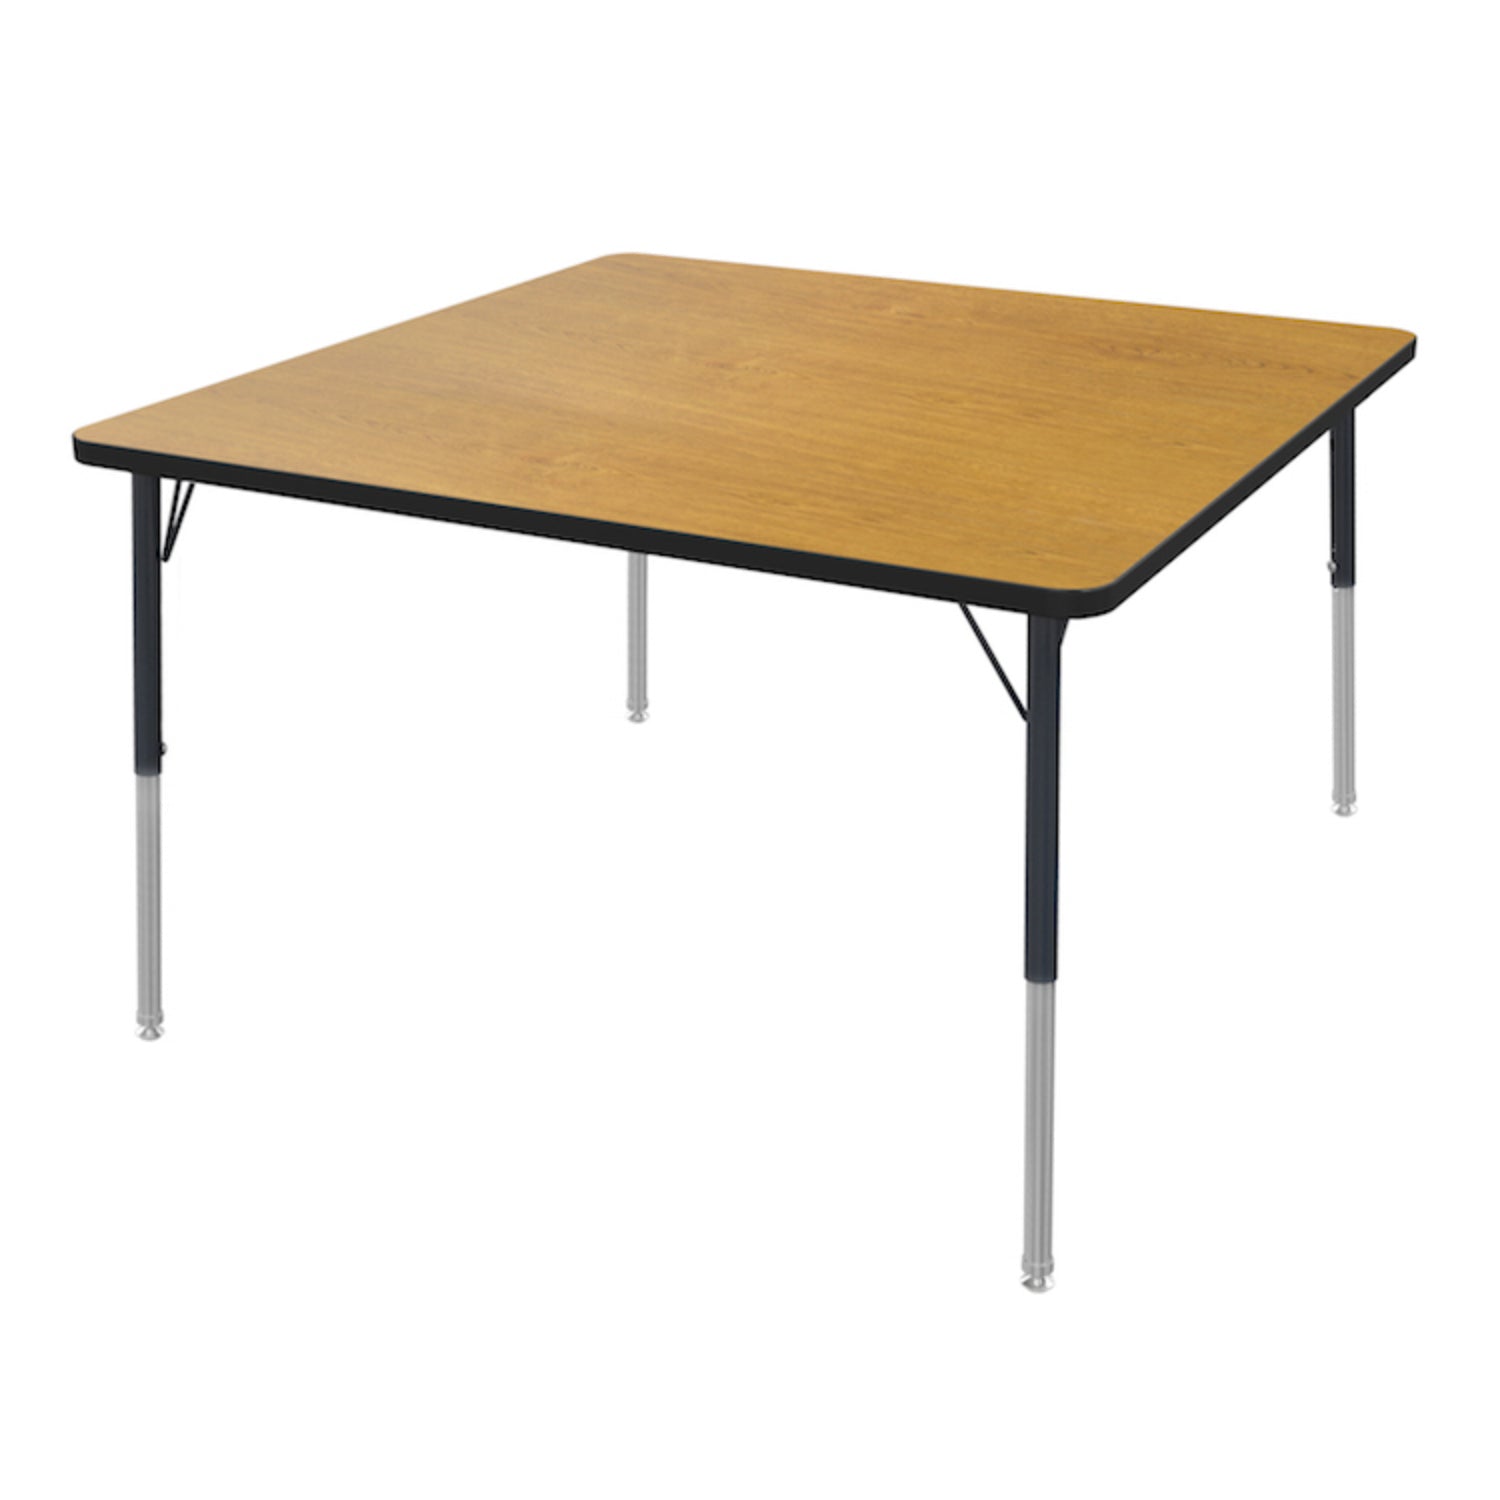 MG Series Adjustable Height Activity Table, 48" x 48" Square